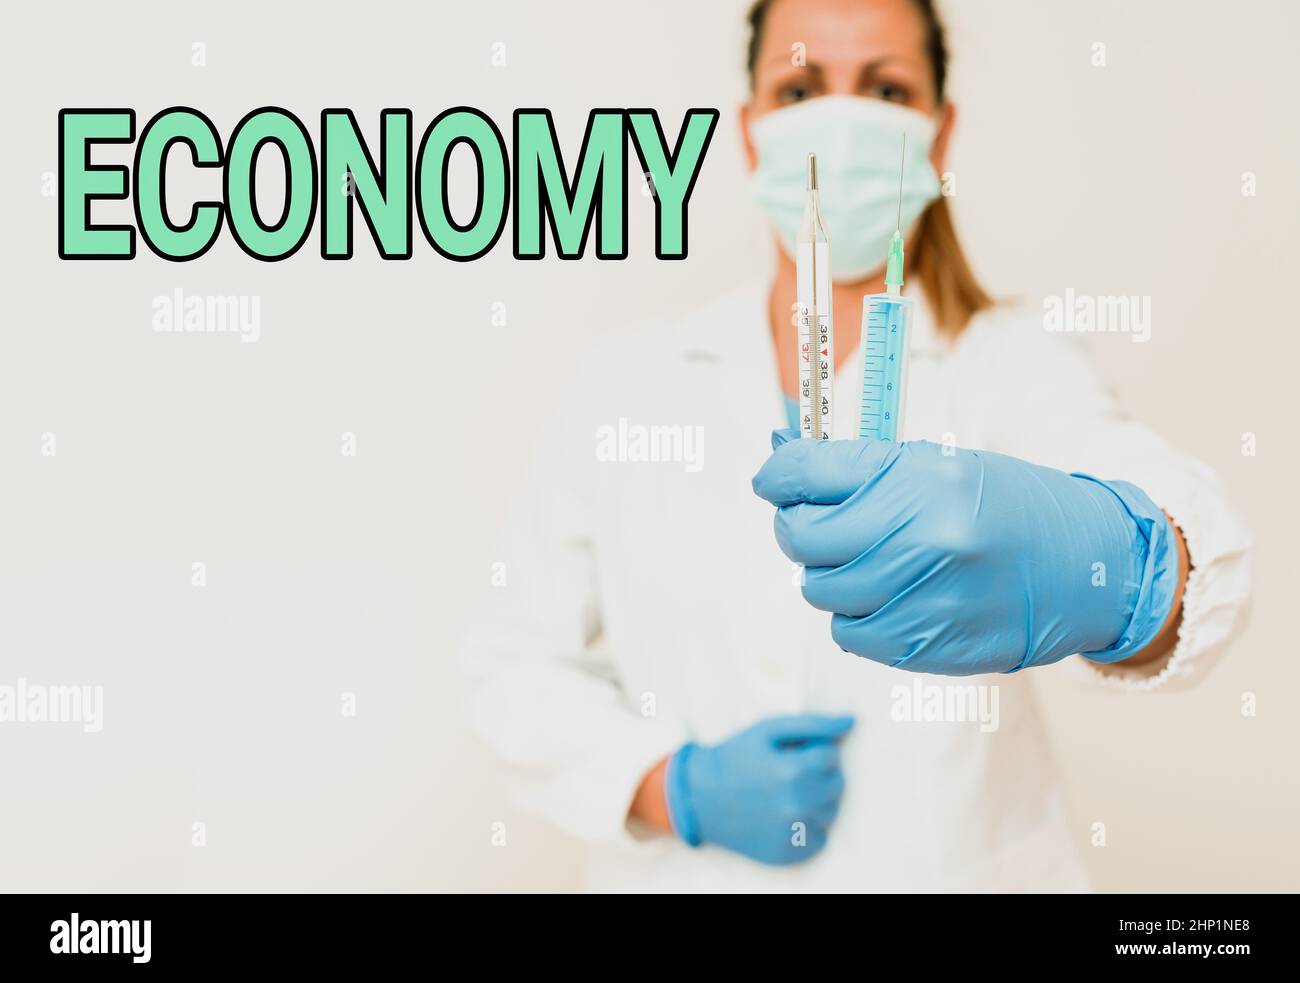 Text sign showing Economy, Concept meaning Management of financial resources Accounting information analysis Testing New Vaccine For The Virus Present Stock Photo